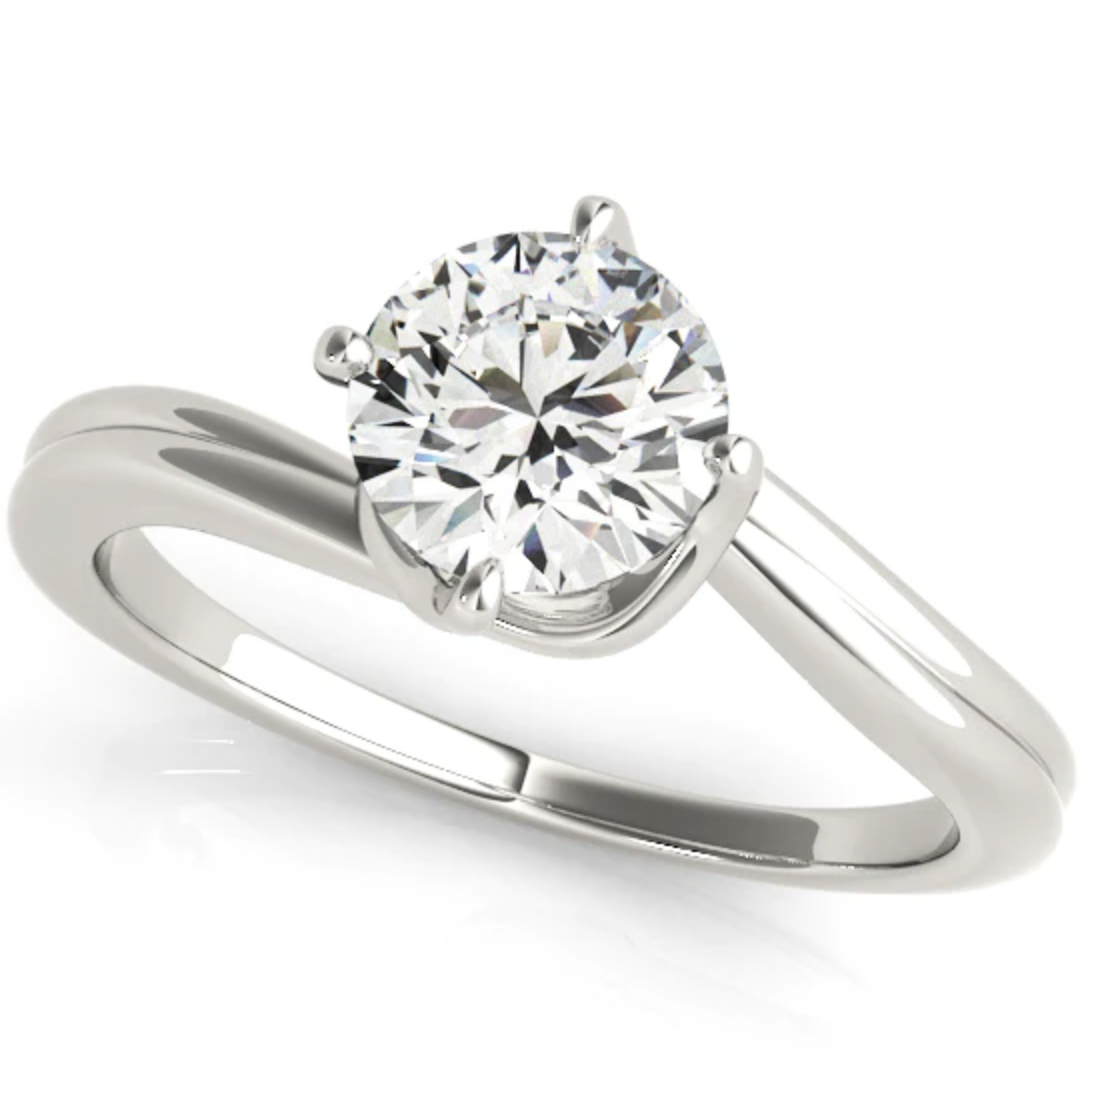 Blooming Solitaire Rings